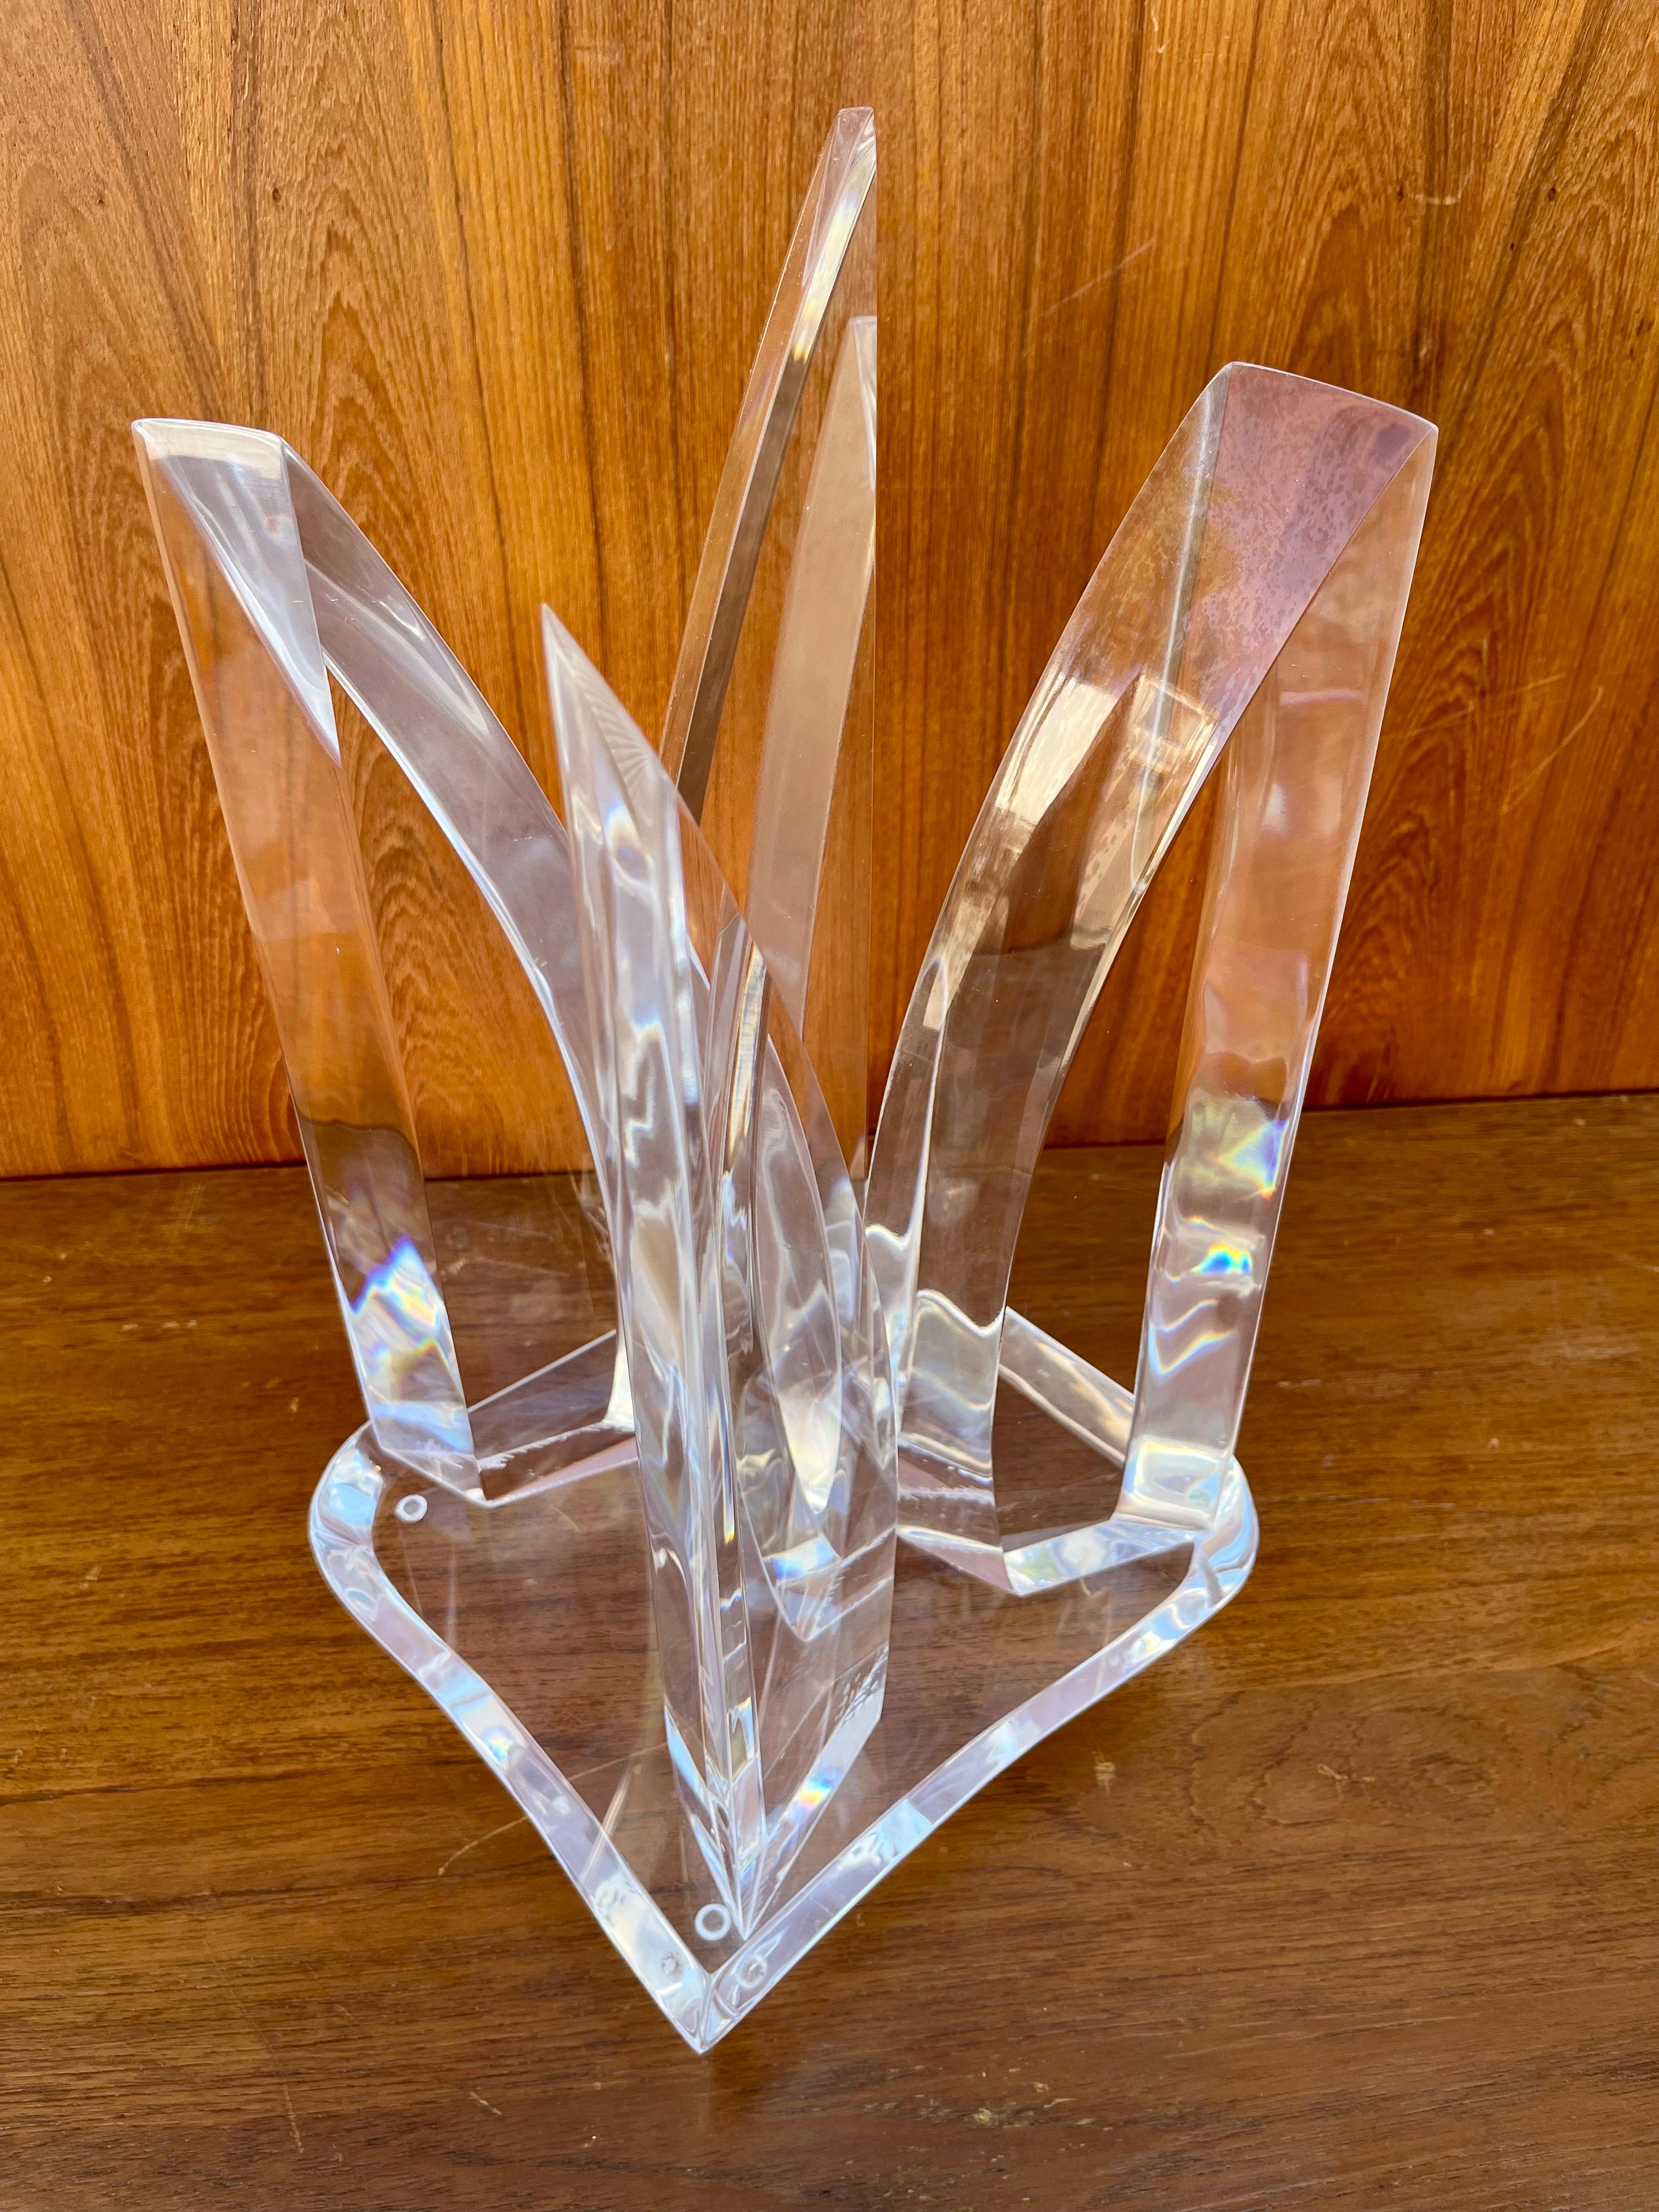 1970s Mid-Century Modern Abstract Lucite Sculpture in the Hivo Van Teal's Style For Sale 3